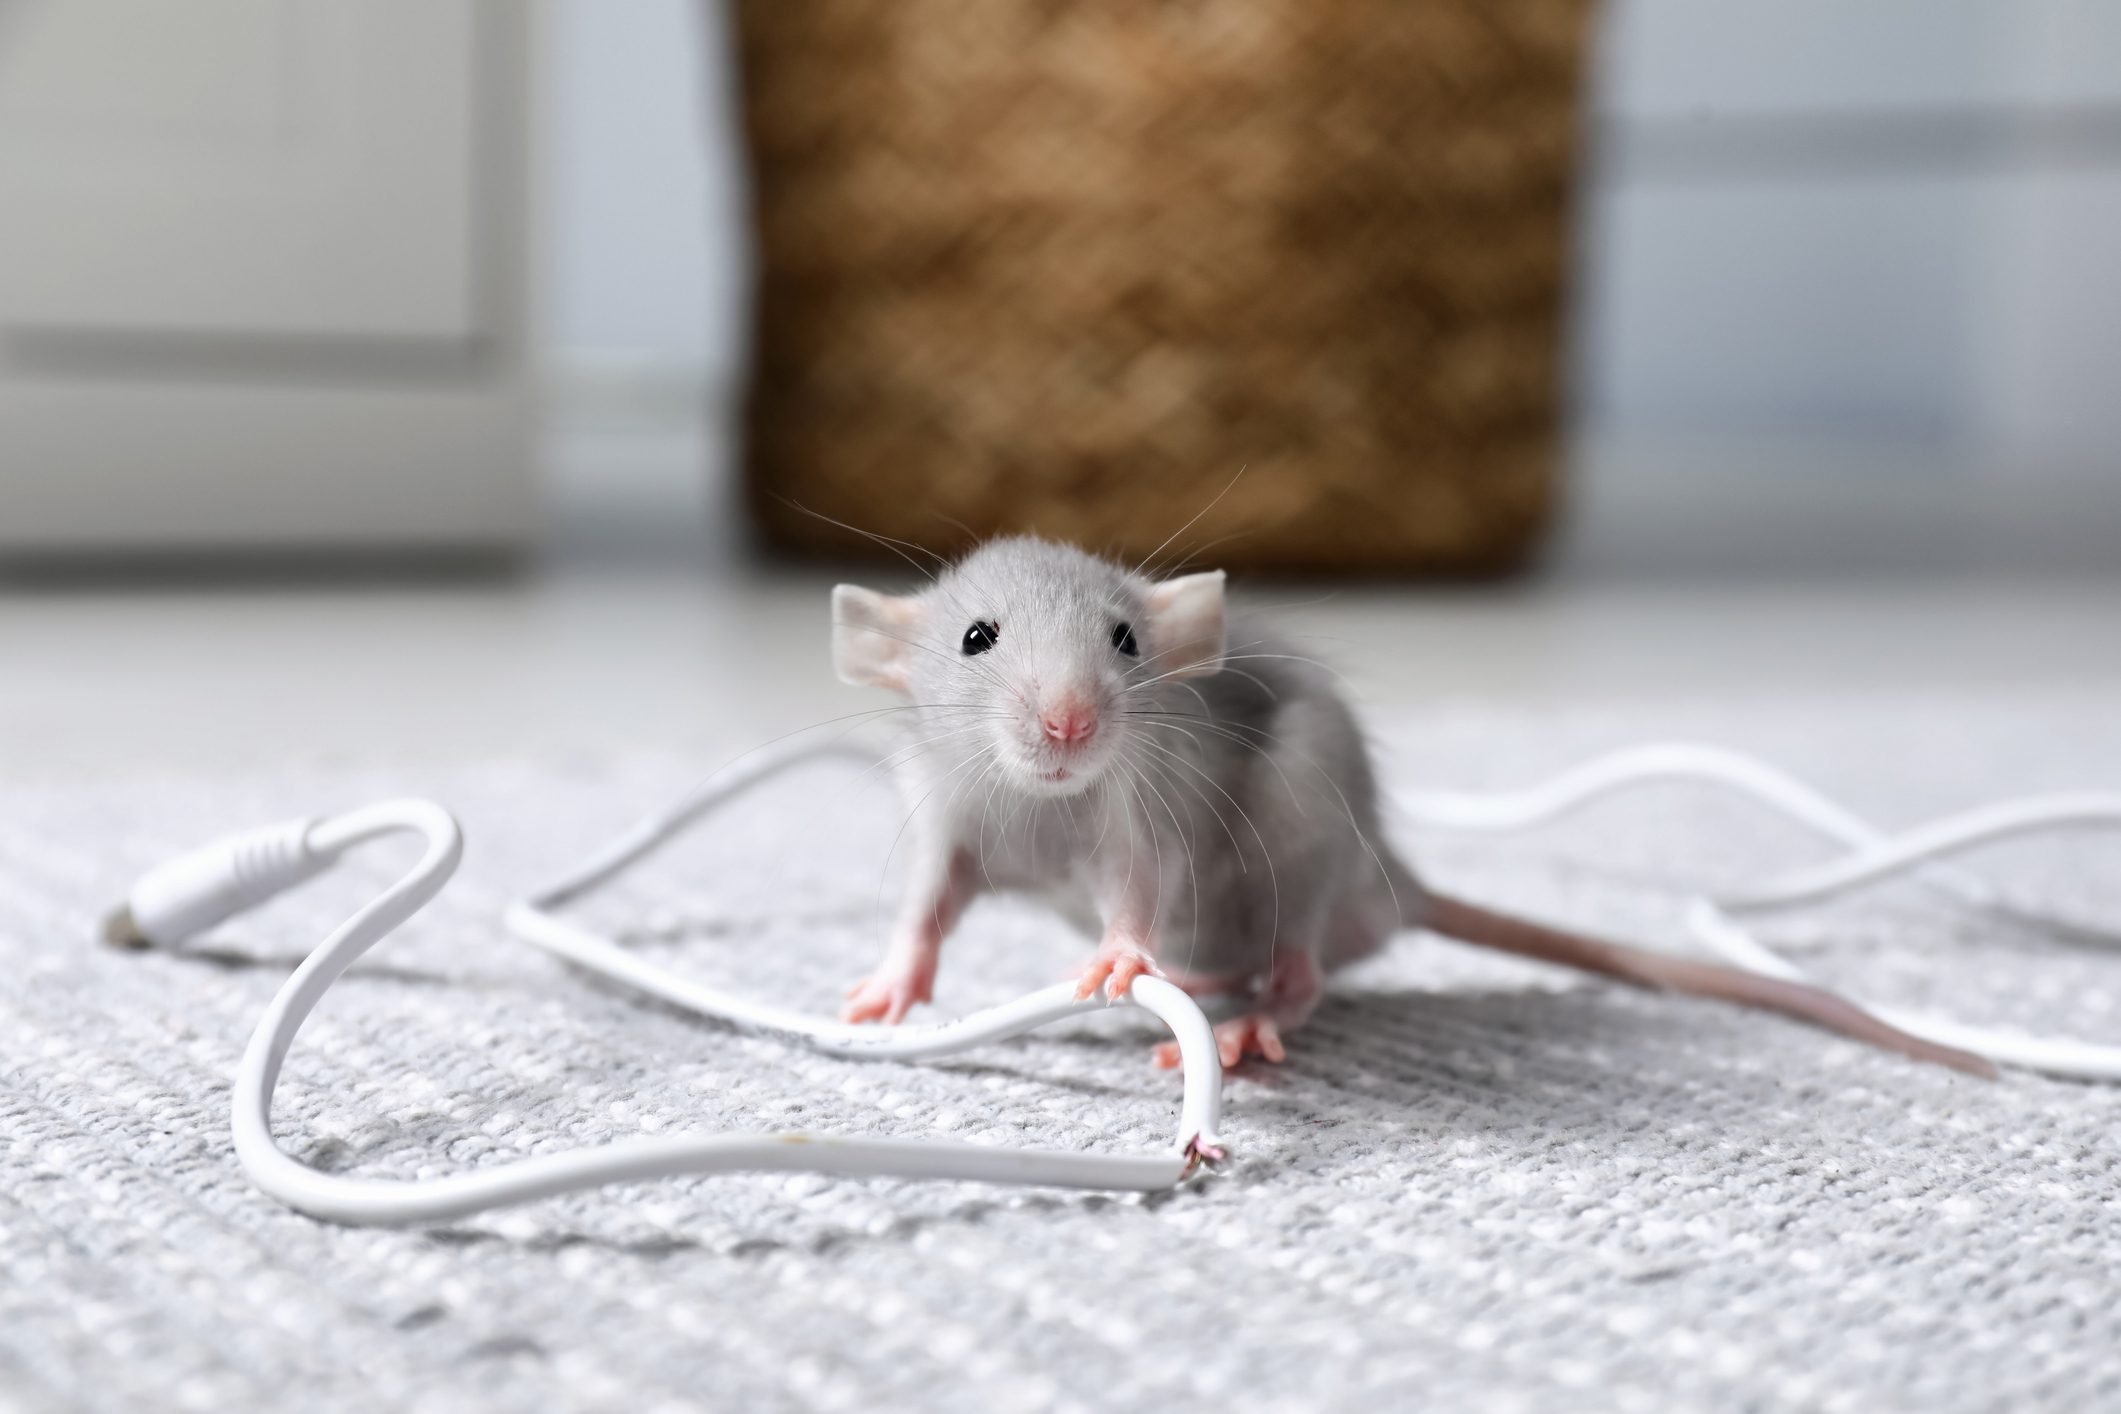 Why Do Mice Chew Through Electrical Wires?